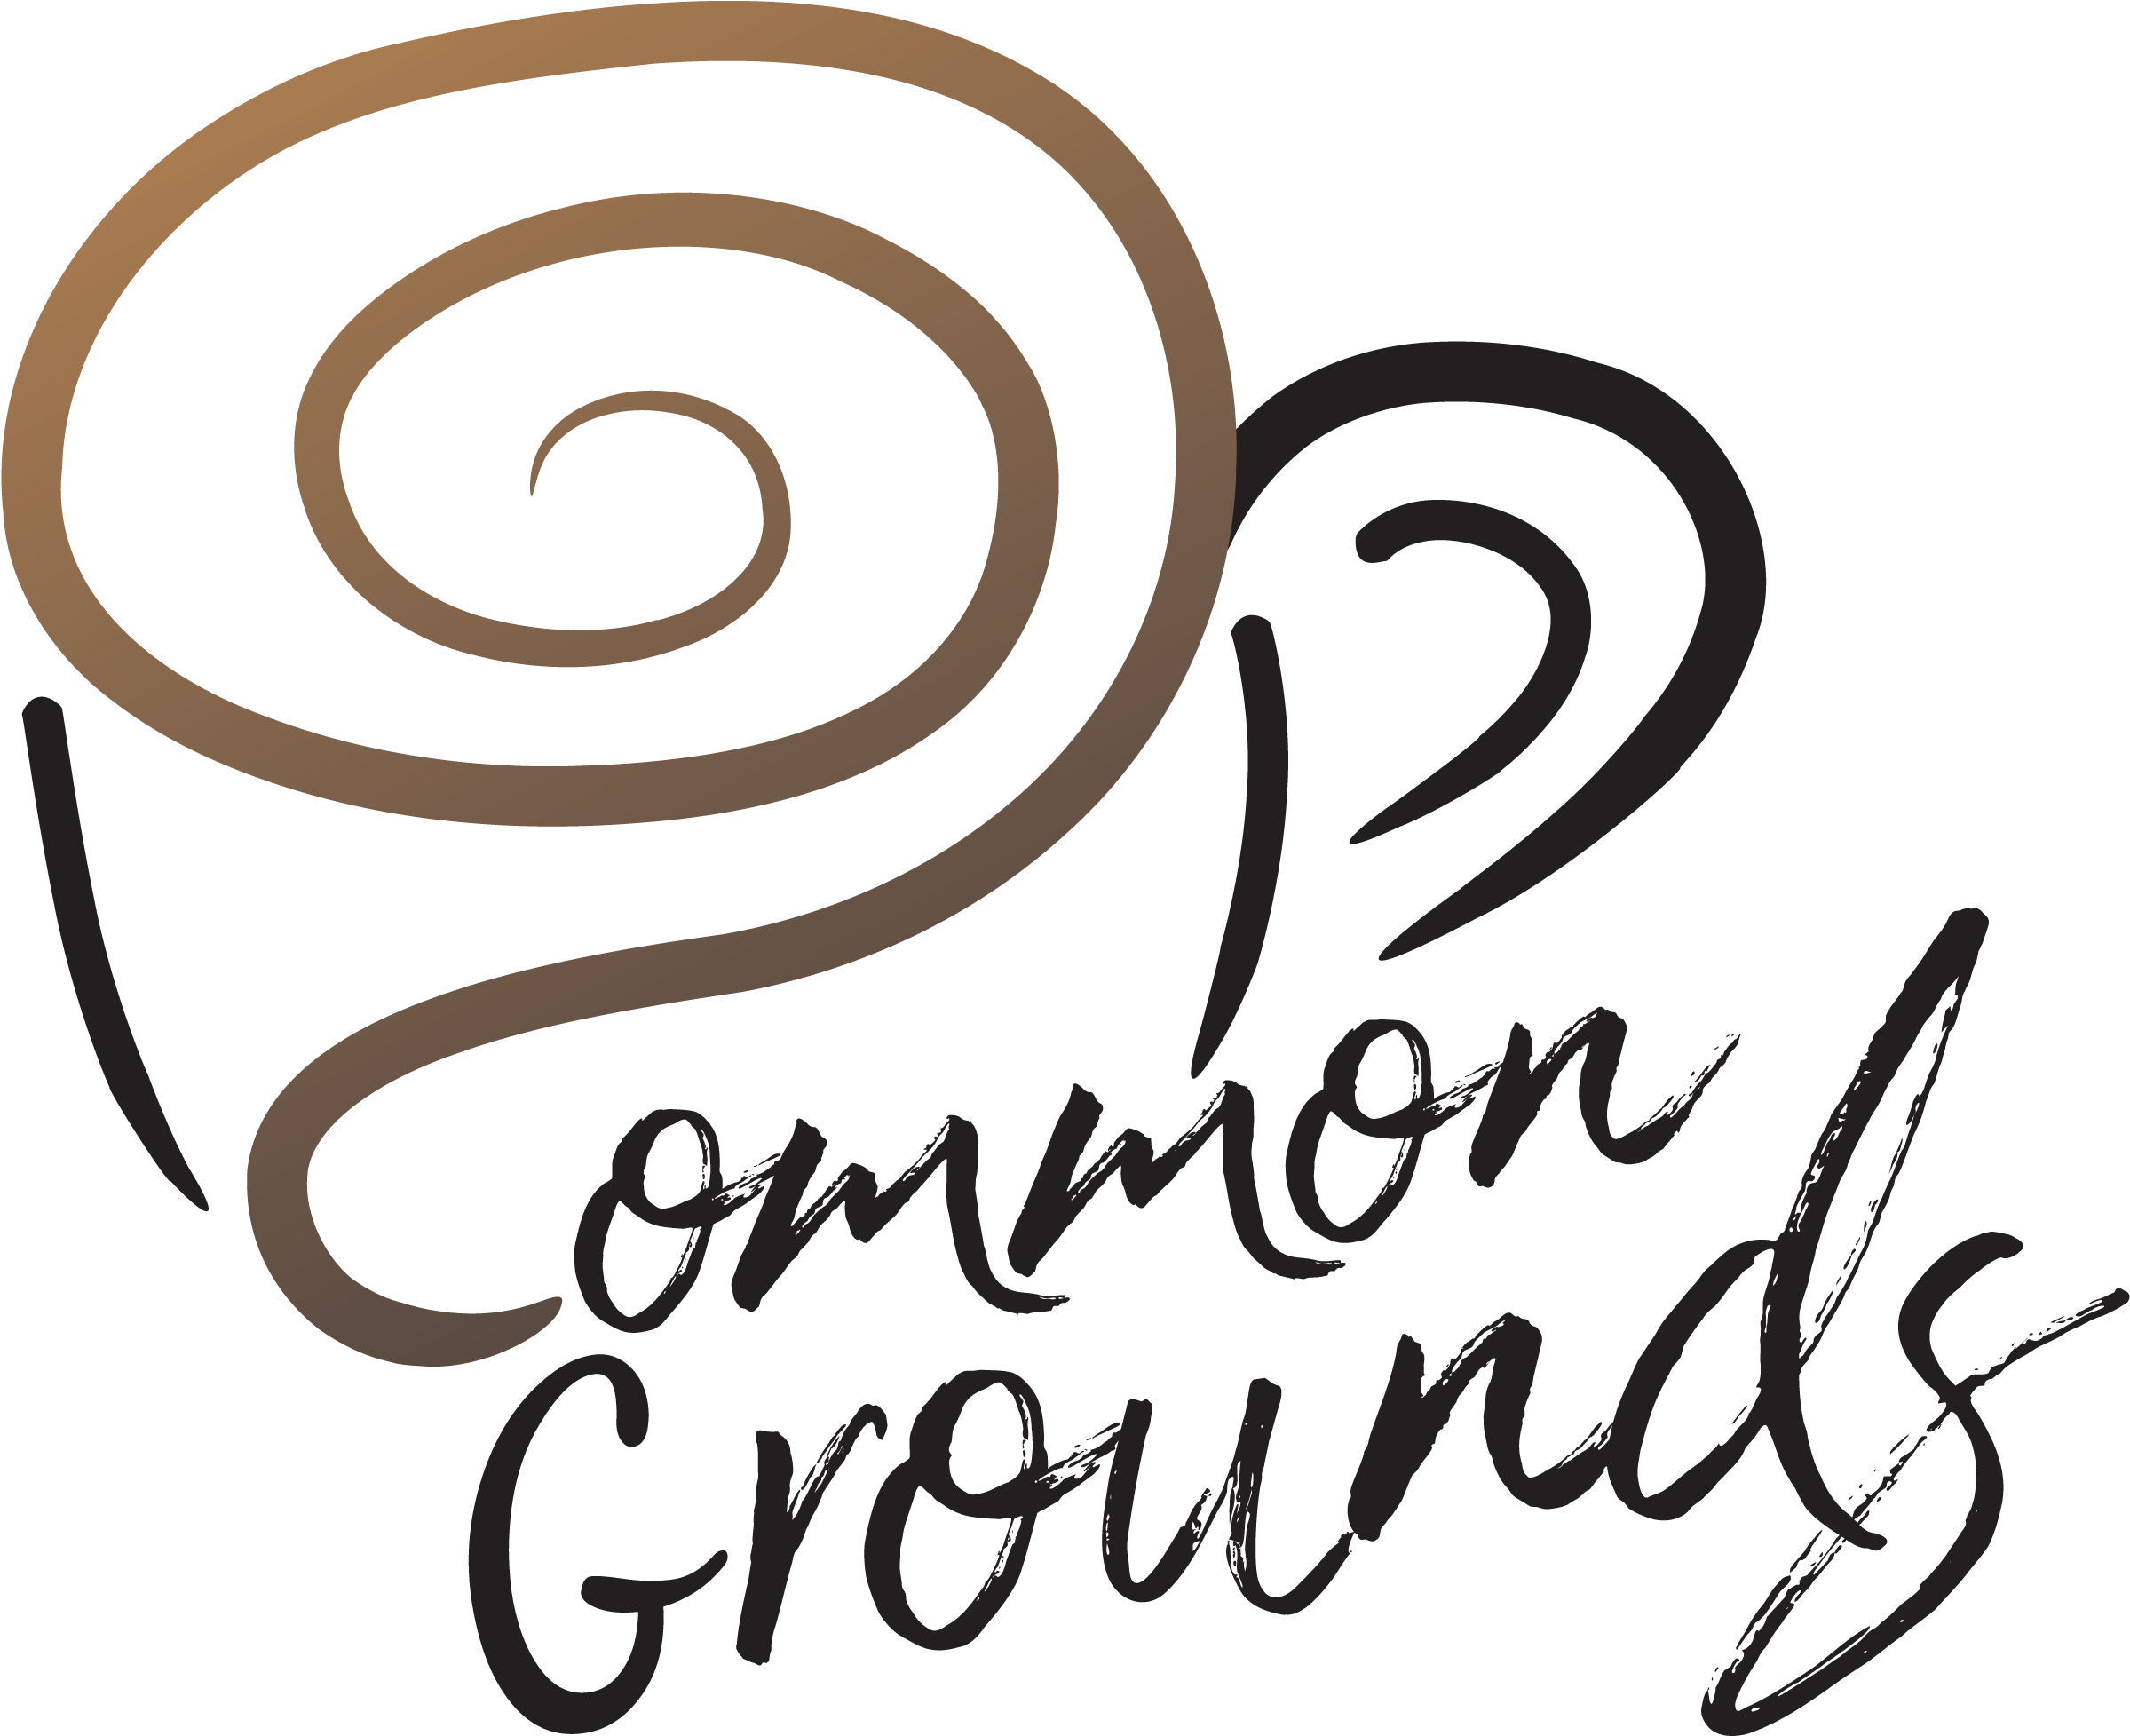 Common Grounds Is A Weekly Event Focused On Bringing - Calligraphy (2568x2035)